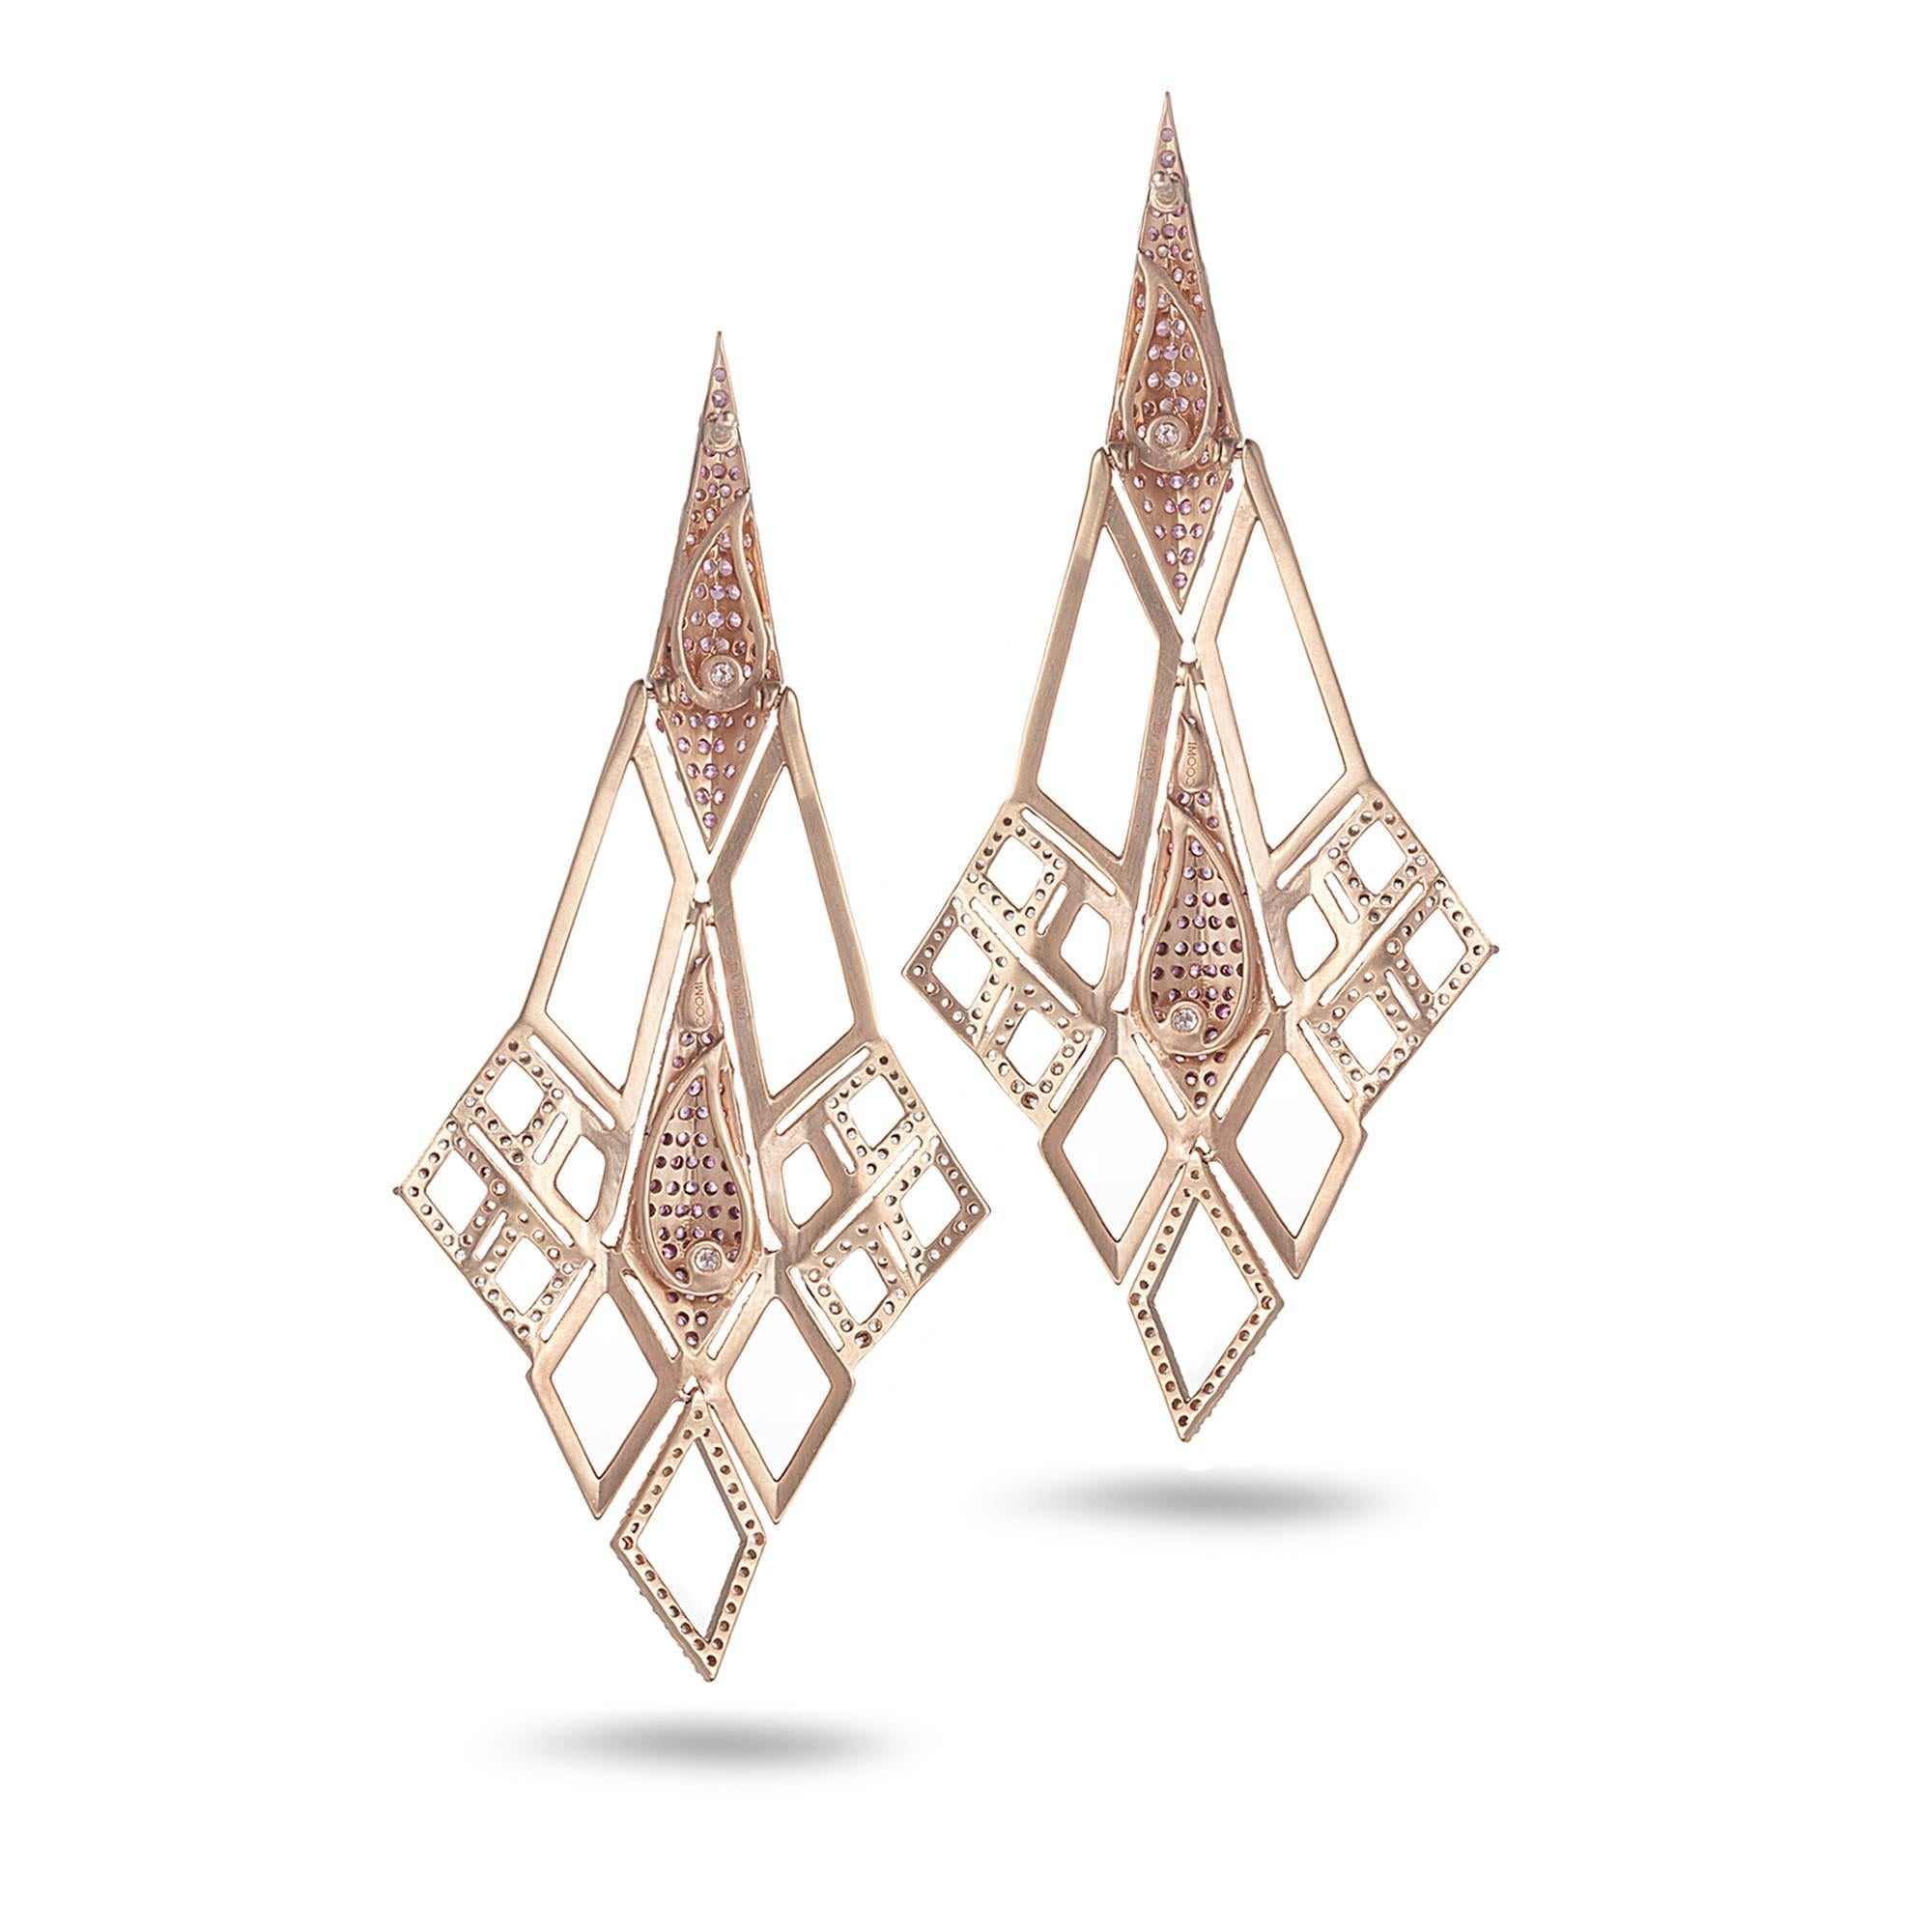 Sagrada Glory Earring Set in 18 karat Rose Gold with 3.29-carat Pink Sapphire and 2.43-carat Pearls. The Earrings are also set with 1.08-carat Diamonds.